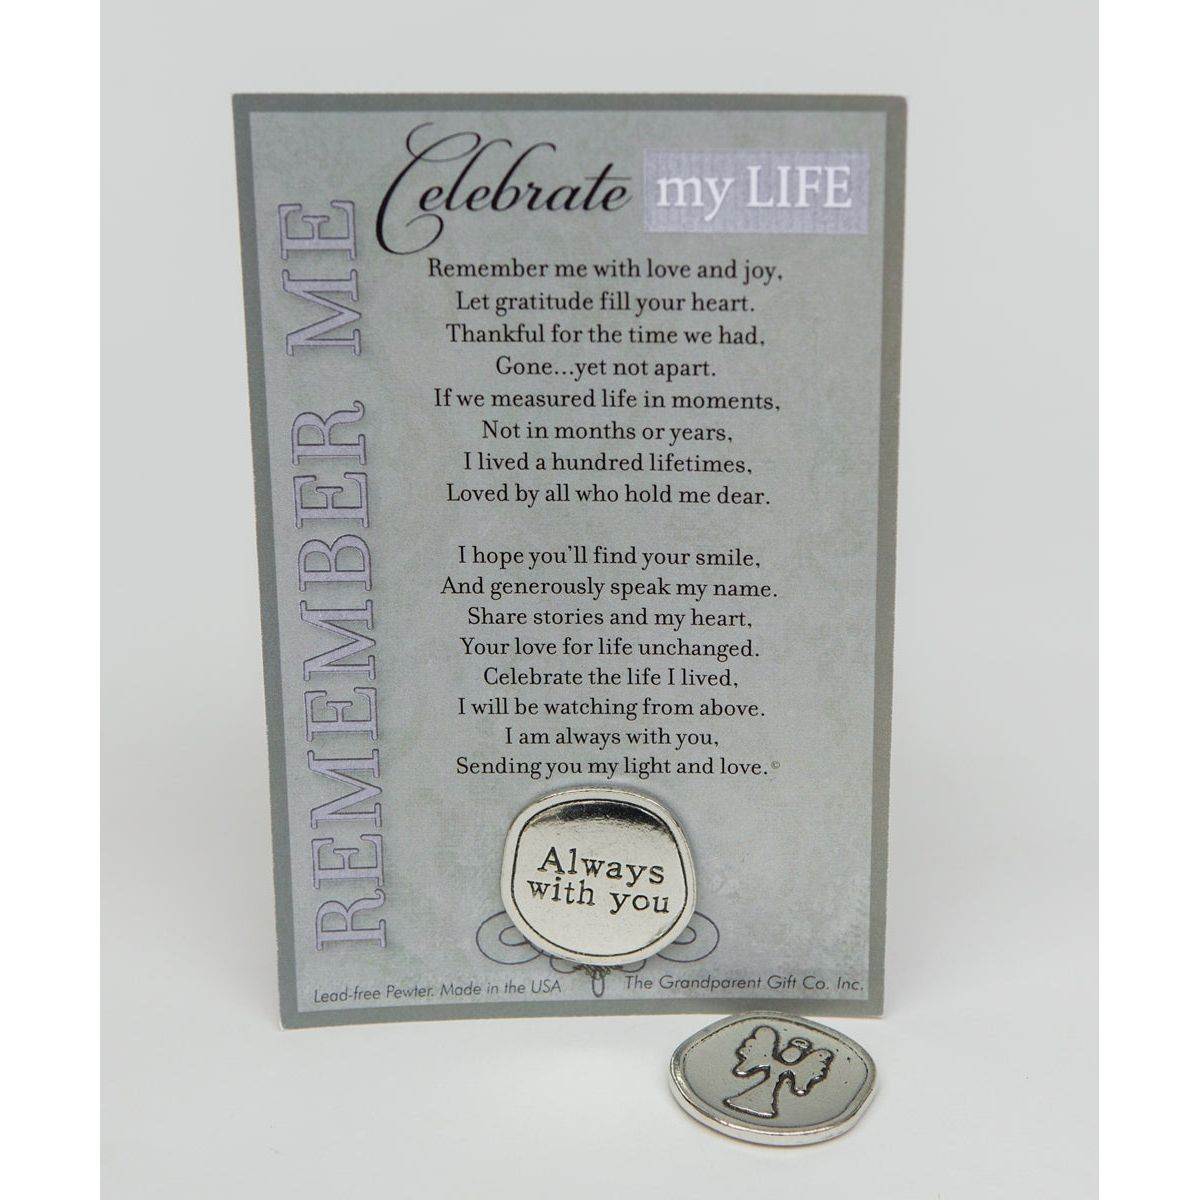 Memorial Gift: Handmade pewter coin with &quot;Always with you&quot; on one side and an angel on the other, packaged in a clear bag with &quot;Celebration of Life&quot; poem.